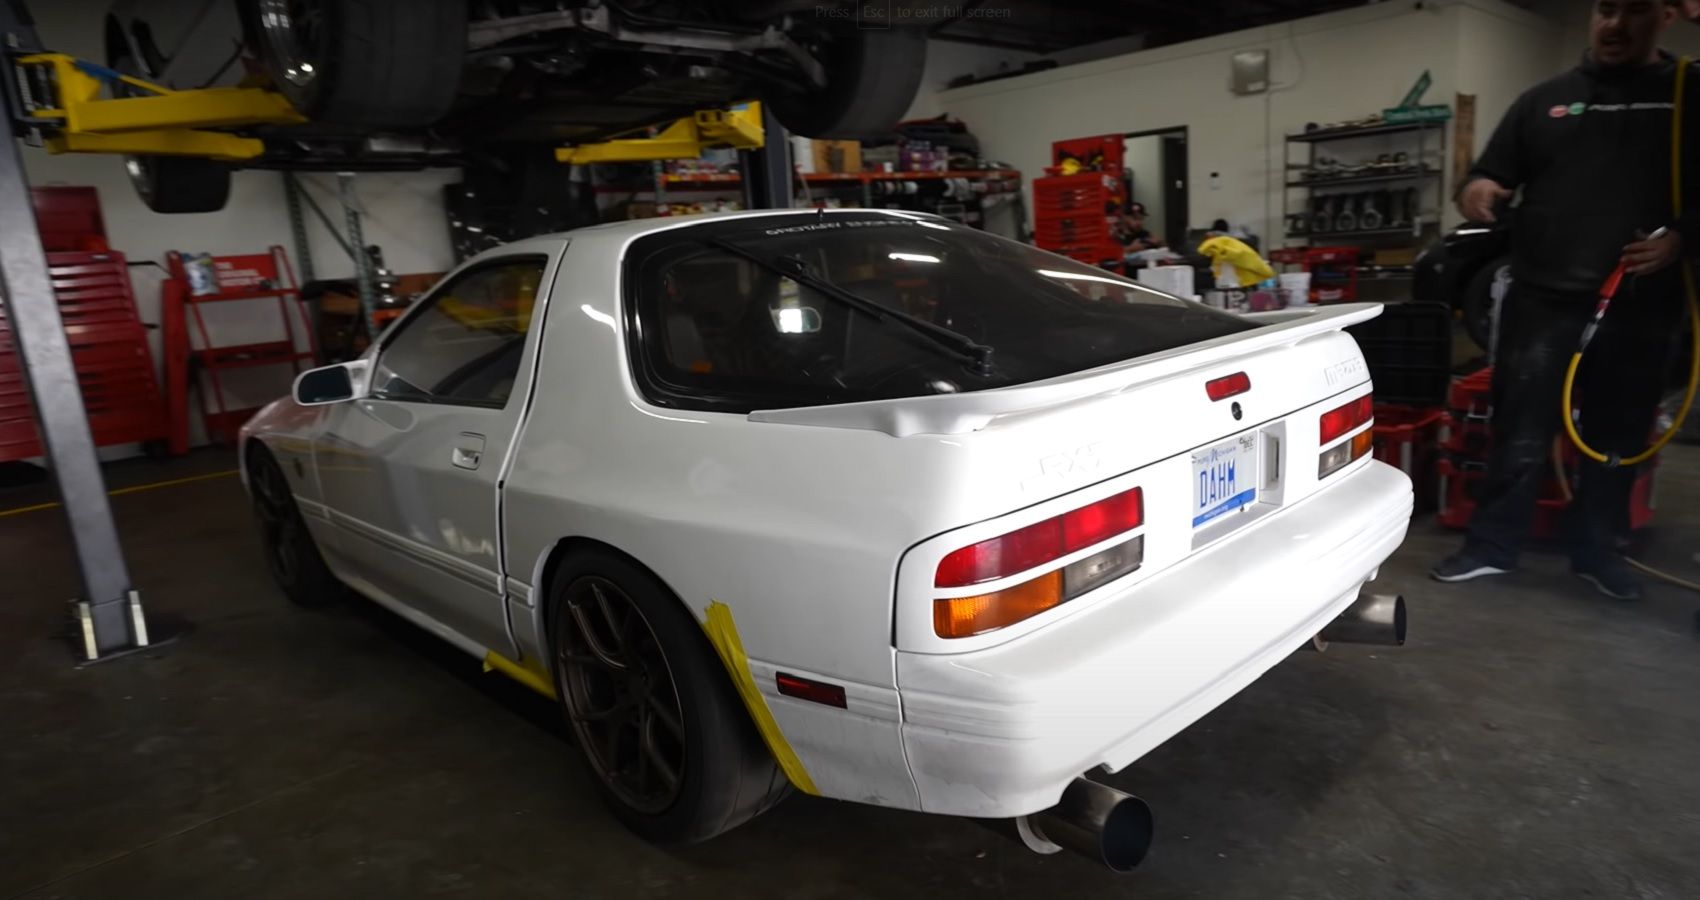 Rear quarter side of white Mazda RX-7 at the track